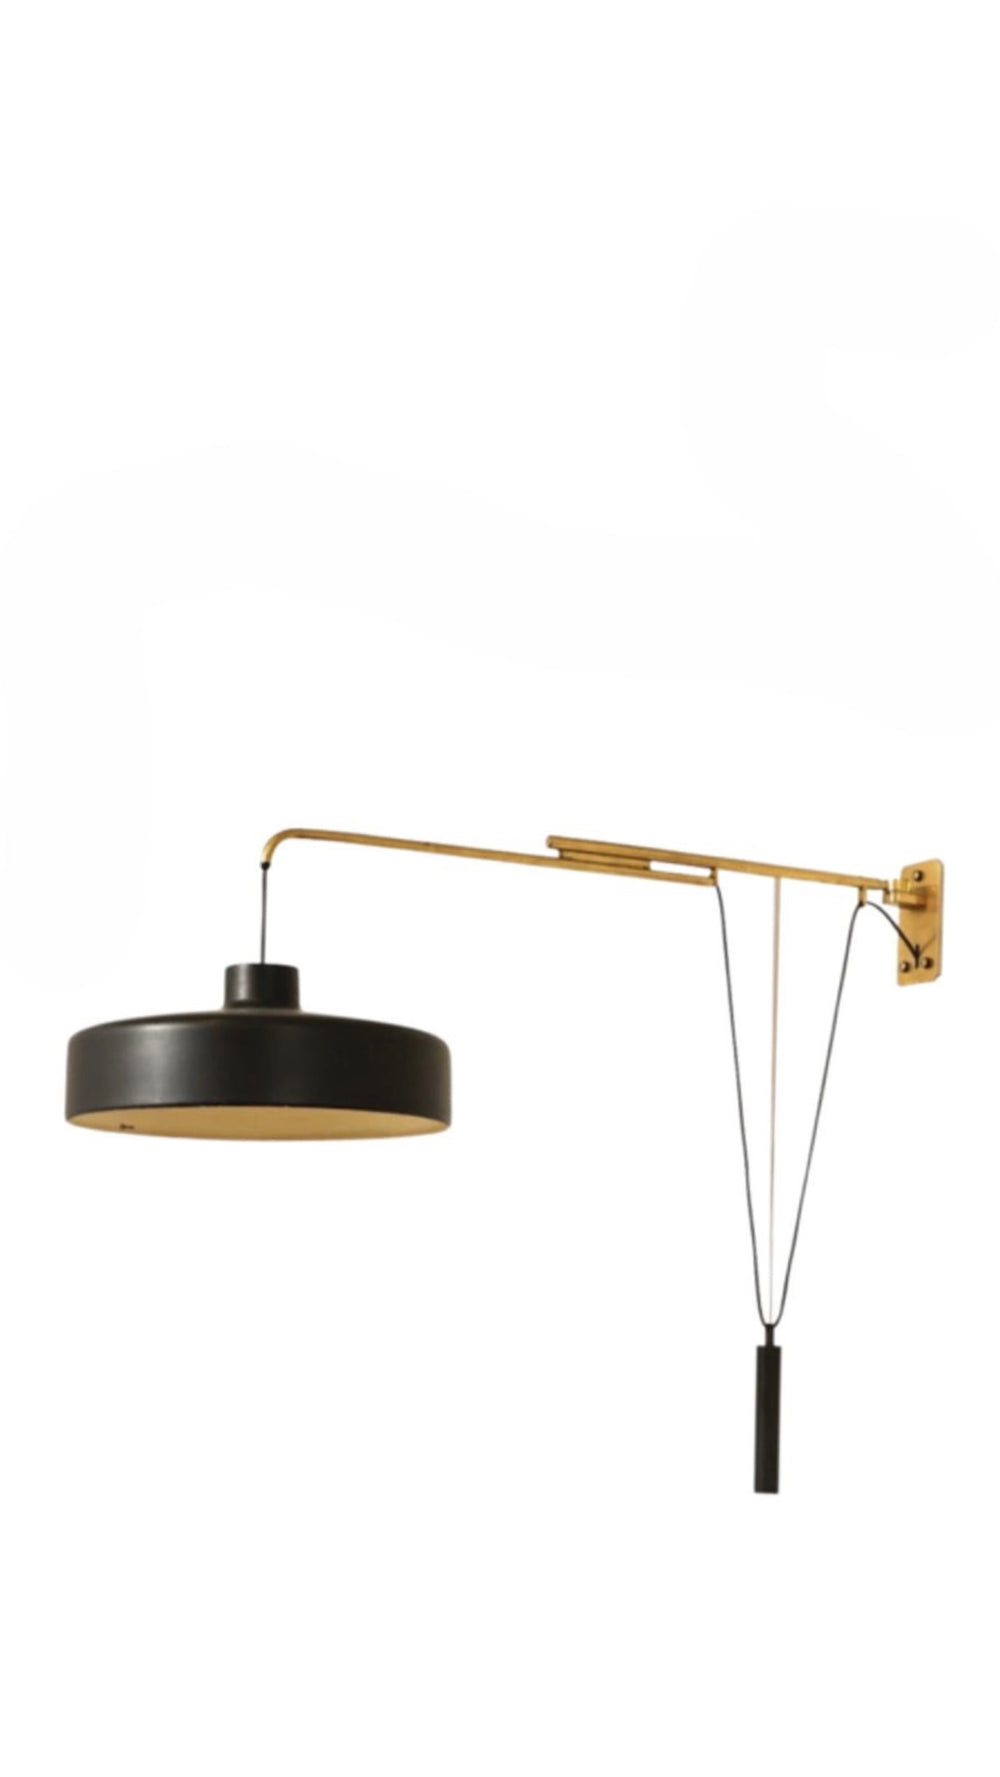 Gino Sarfatti rare model 194/N articulating extension wall lamp for Arteluce, Italy, 1950s